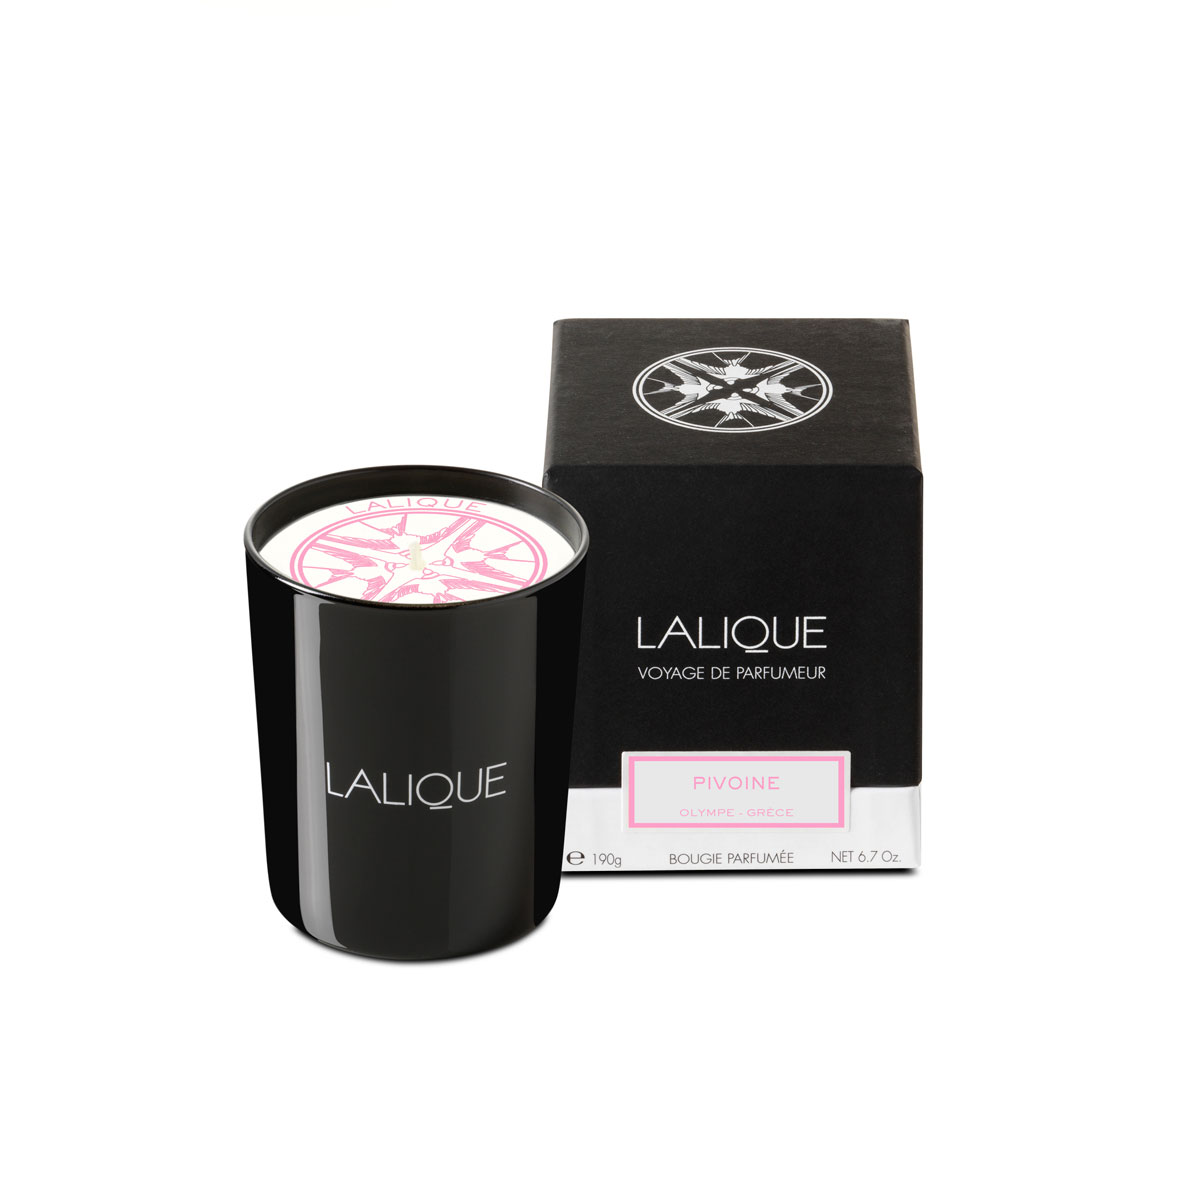 Lalique Pivoine Olymp Mount Scented Candle, Peony Greece